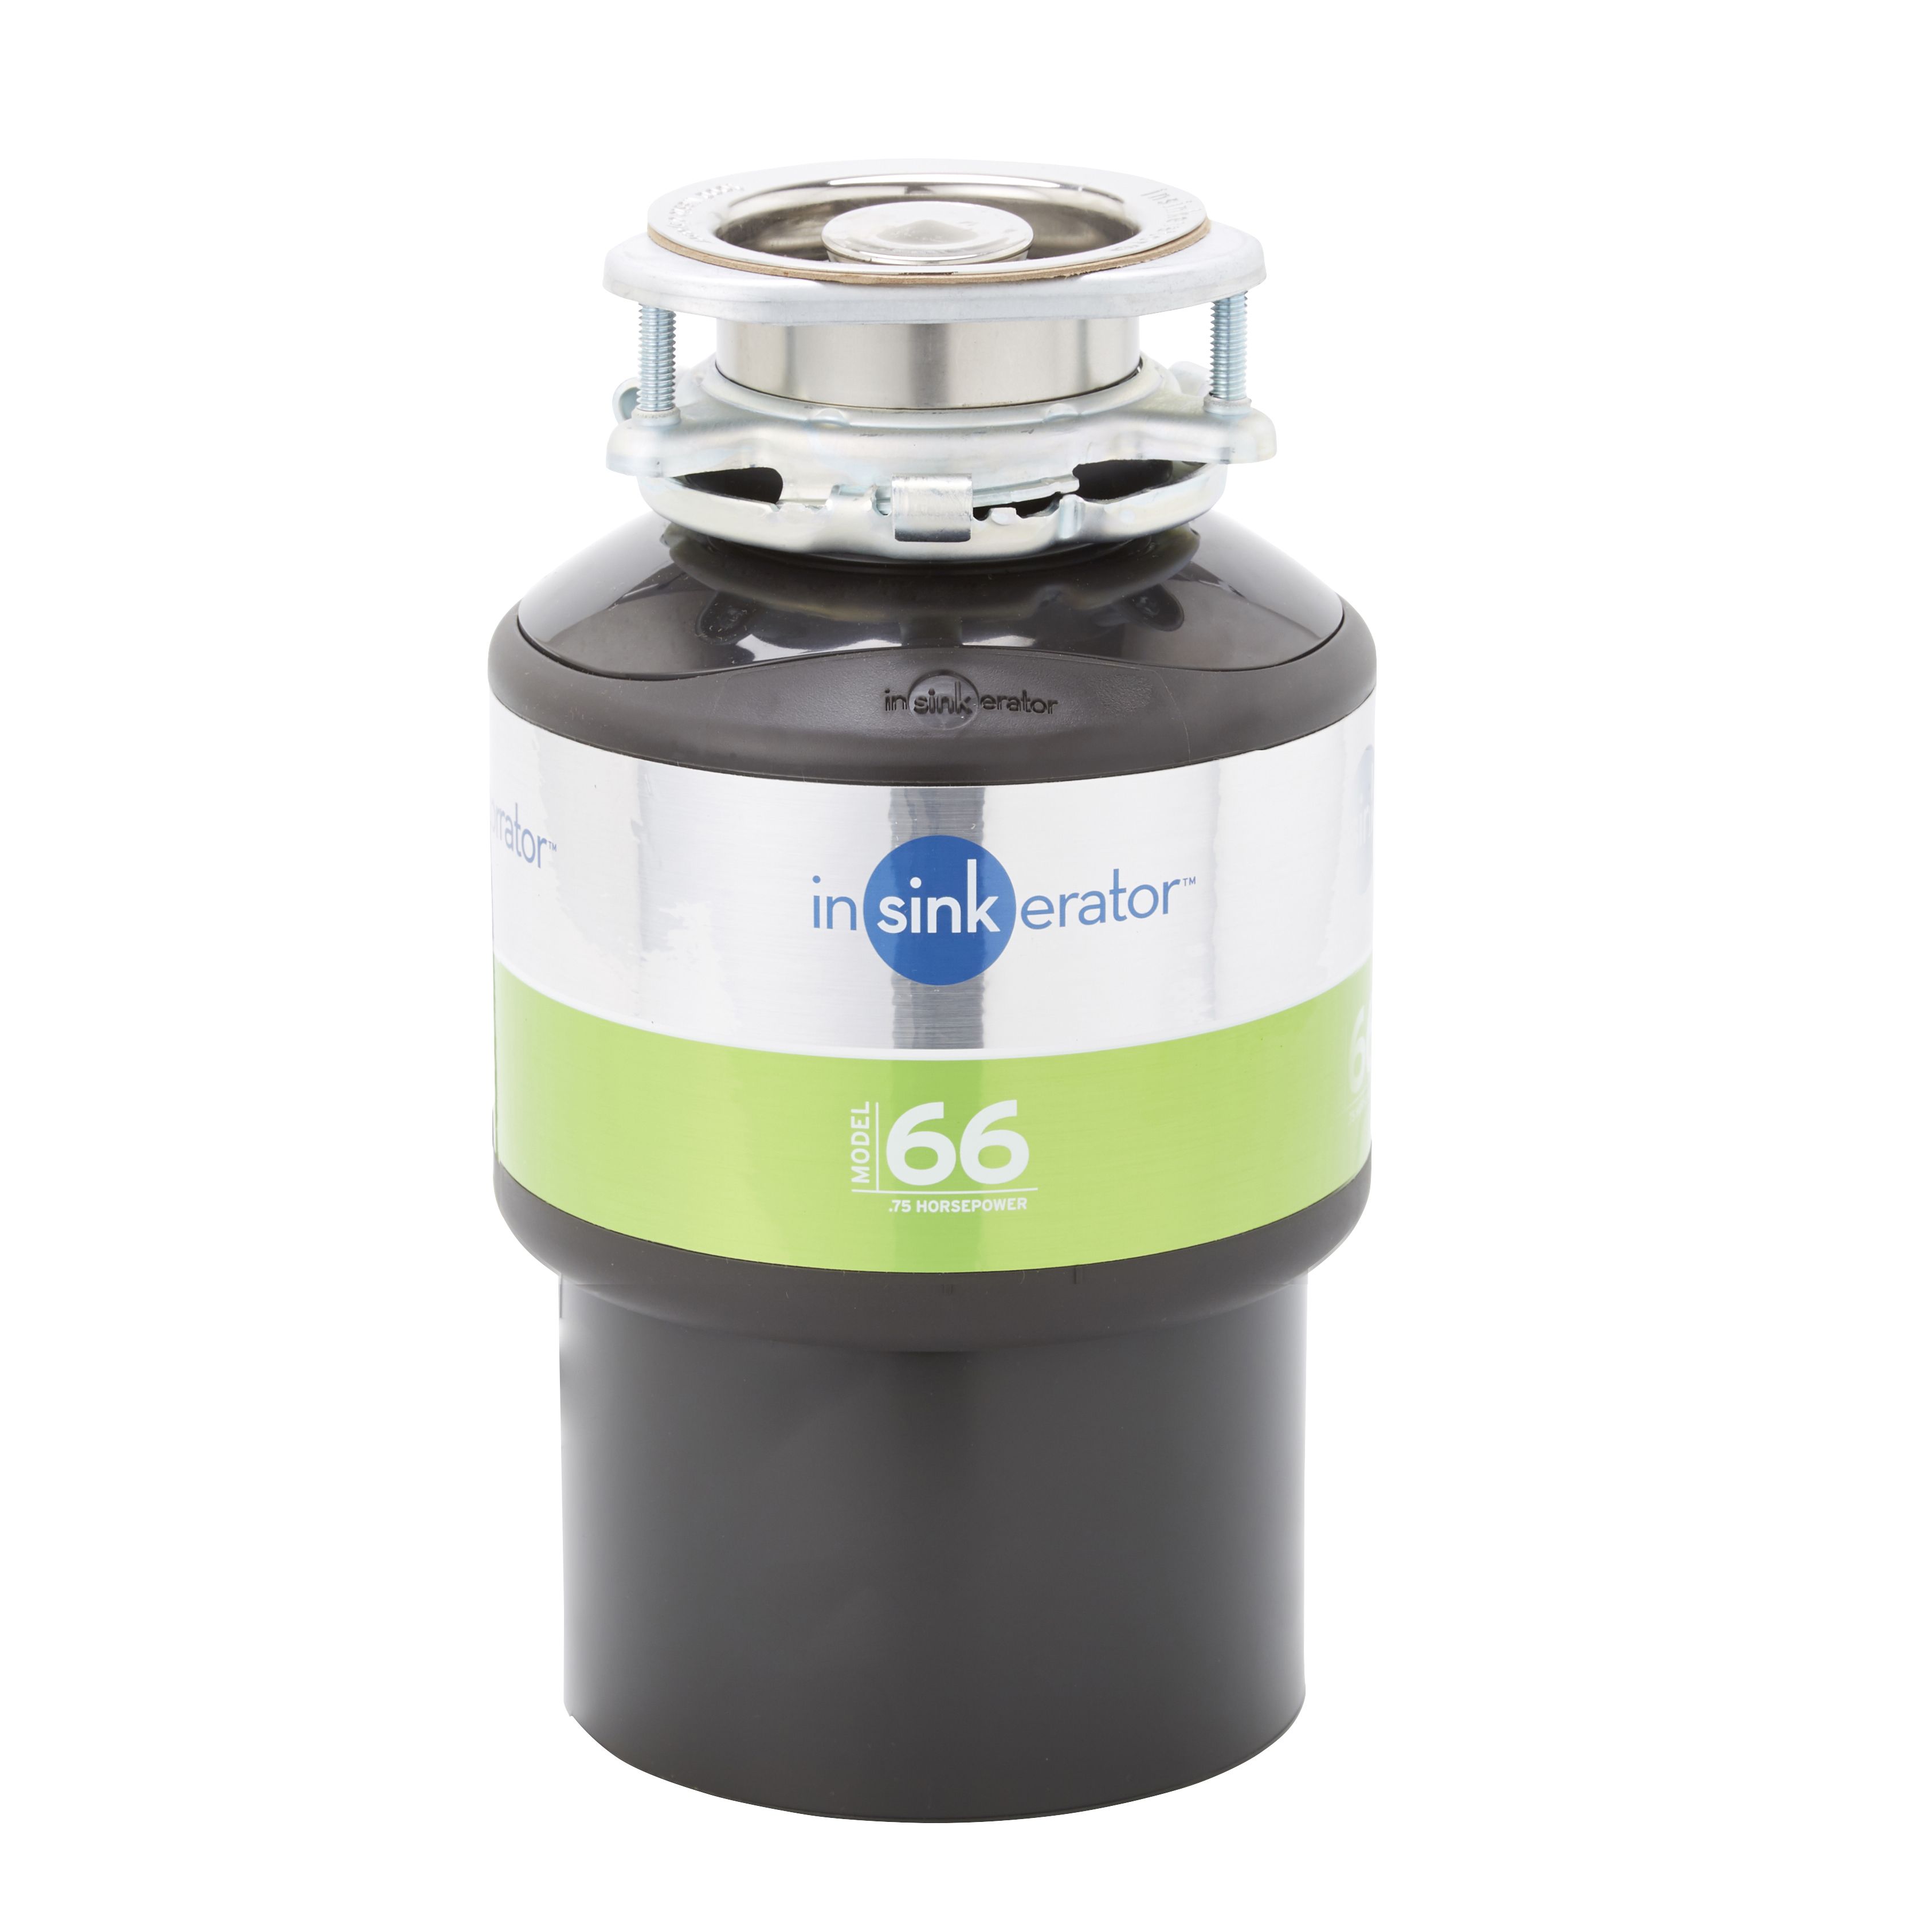 Insinkerator Model 66 Review - InSinkErator Model 66 Food Waste Disposer by Parex - EBOSS / Installation criteria specifications the insinkerator food waste disposer unit uses no blades whatsoever.